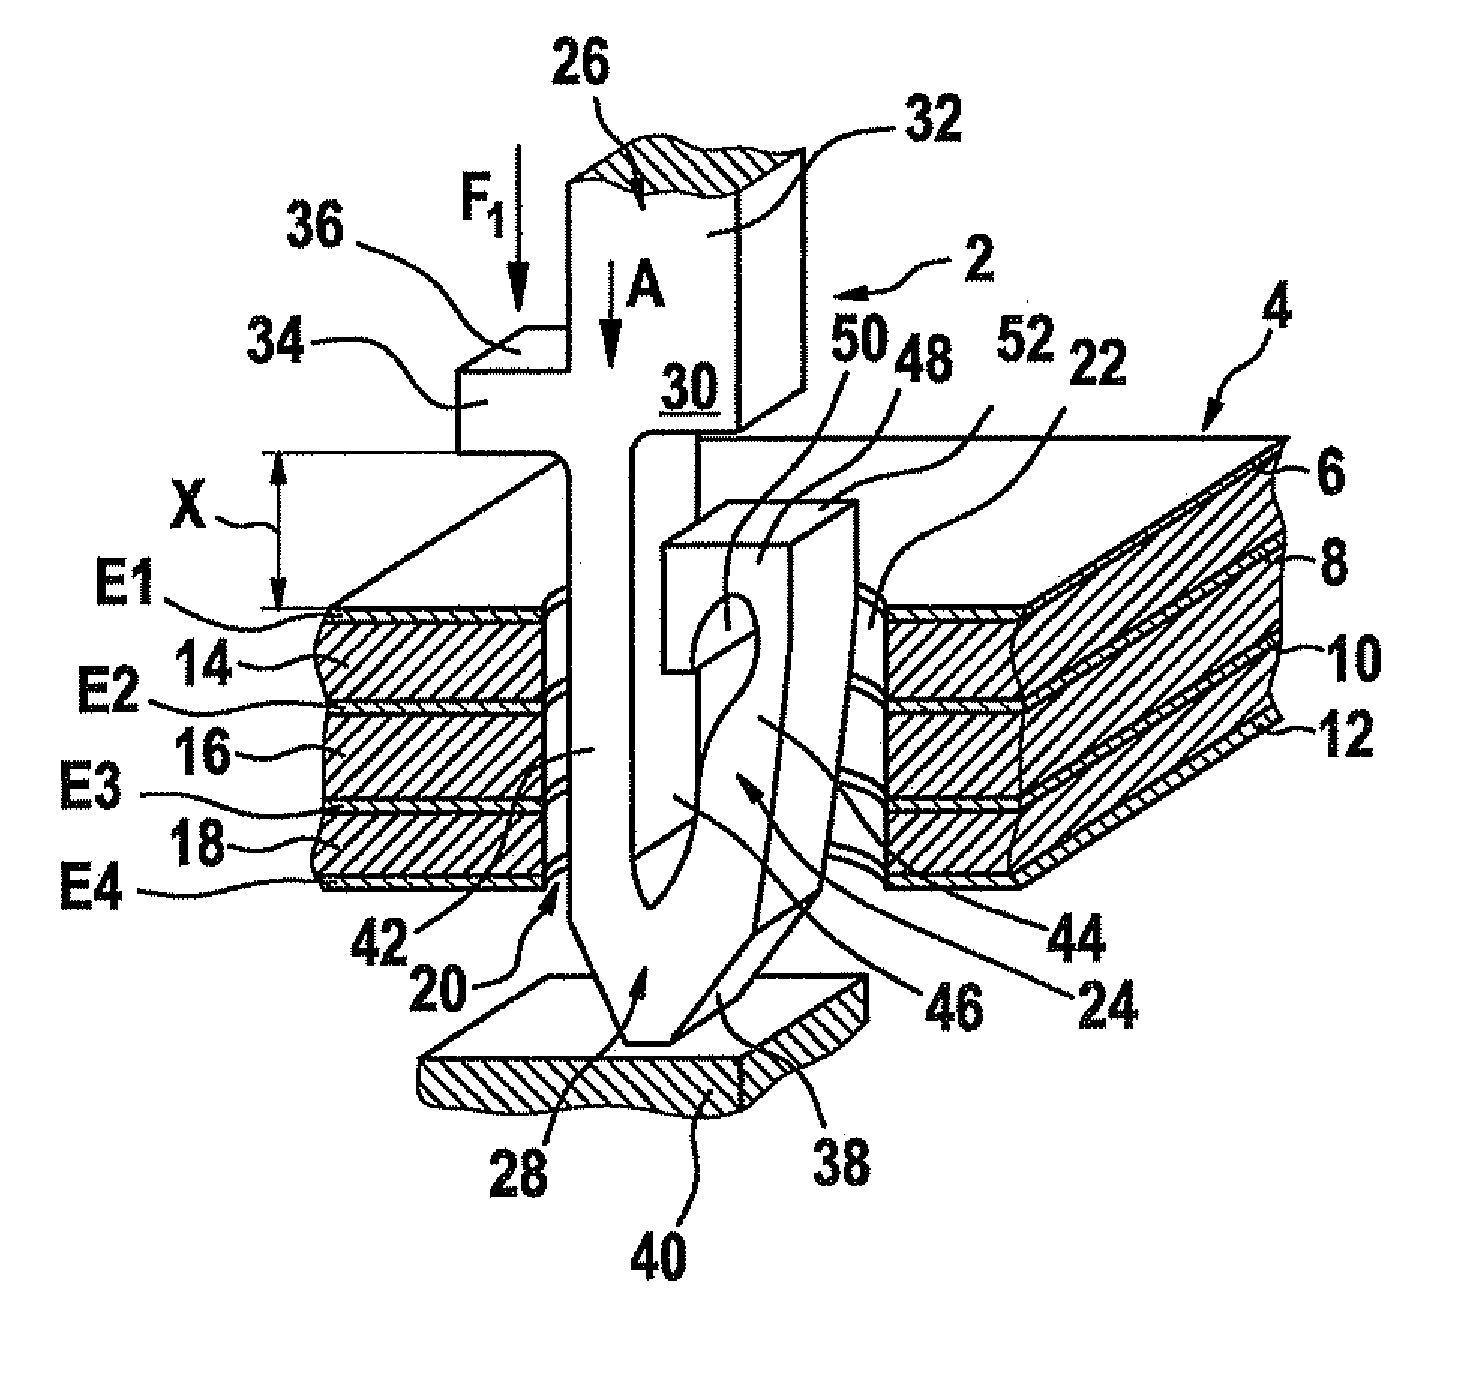 Pin for insertion into a receiving opening in a printed circuit board and method for inserting a pin into a receiving opening in a printed circuit board